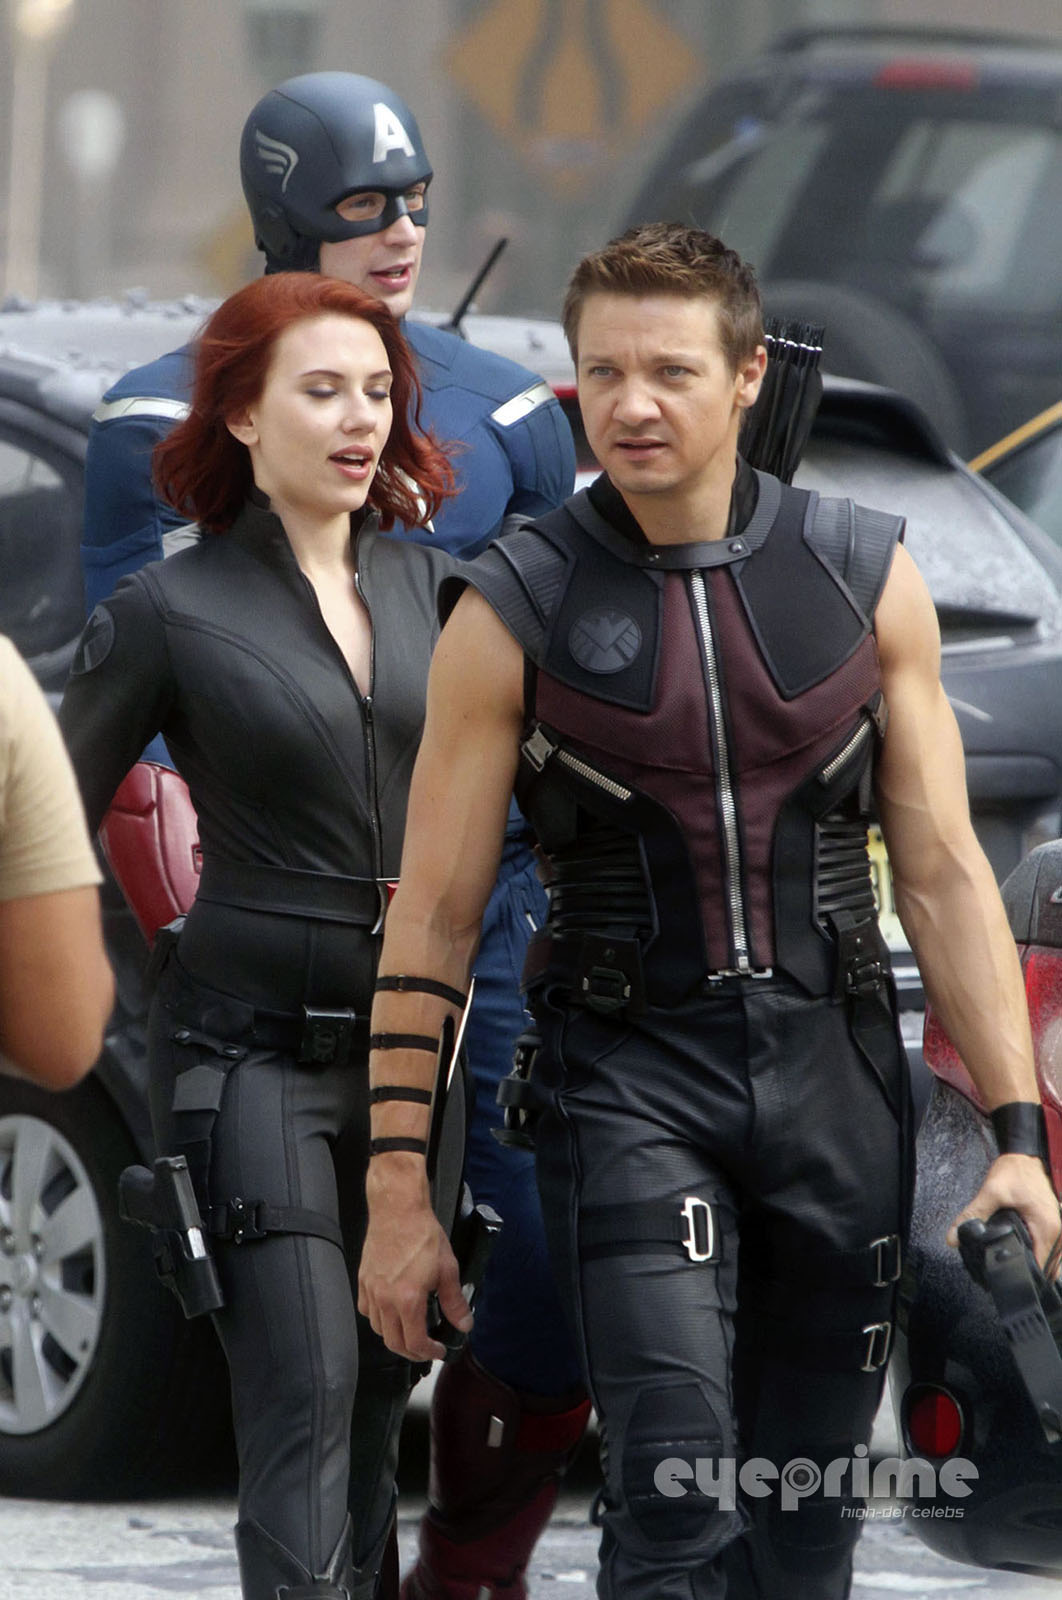 More Images From The Ny Set Of The Avengers Featuring